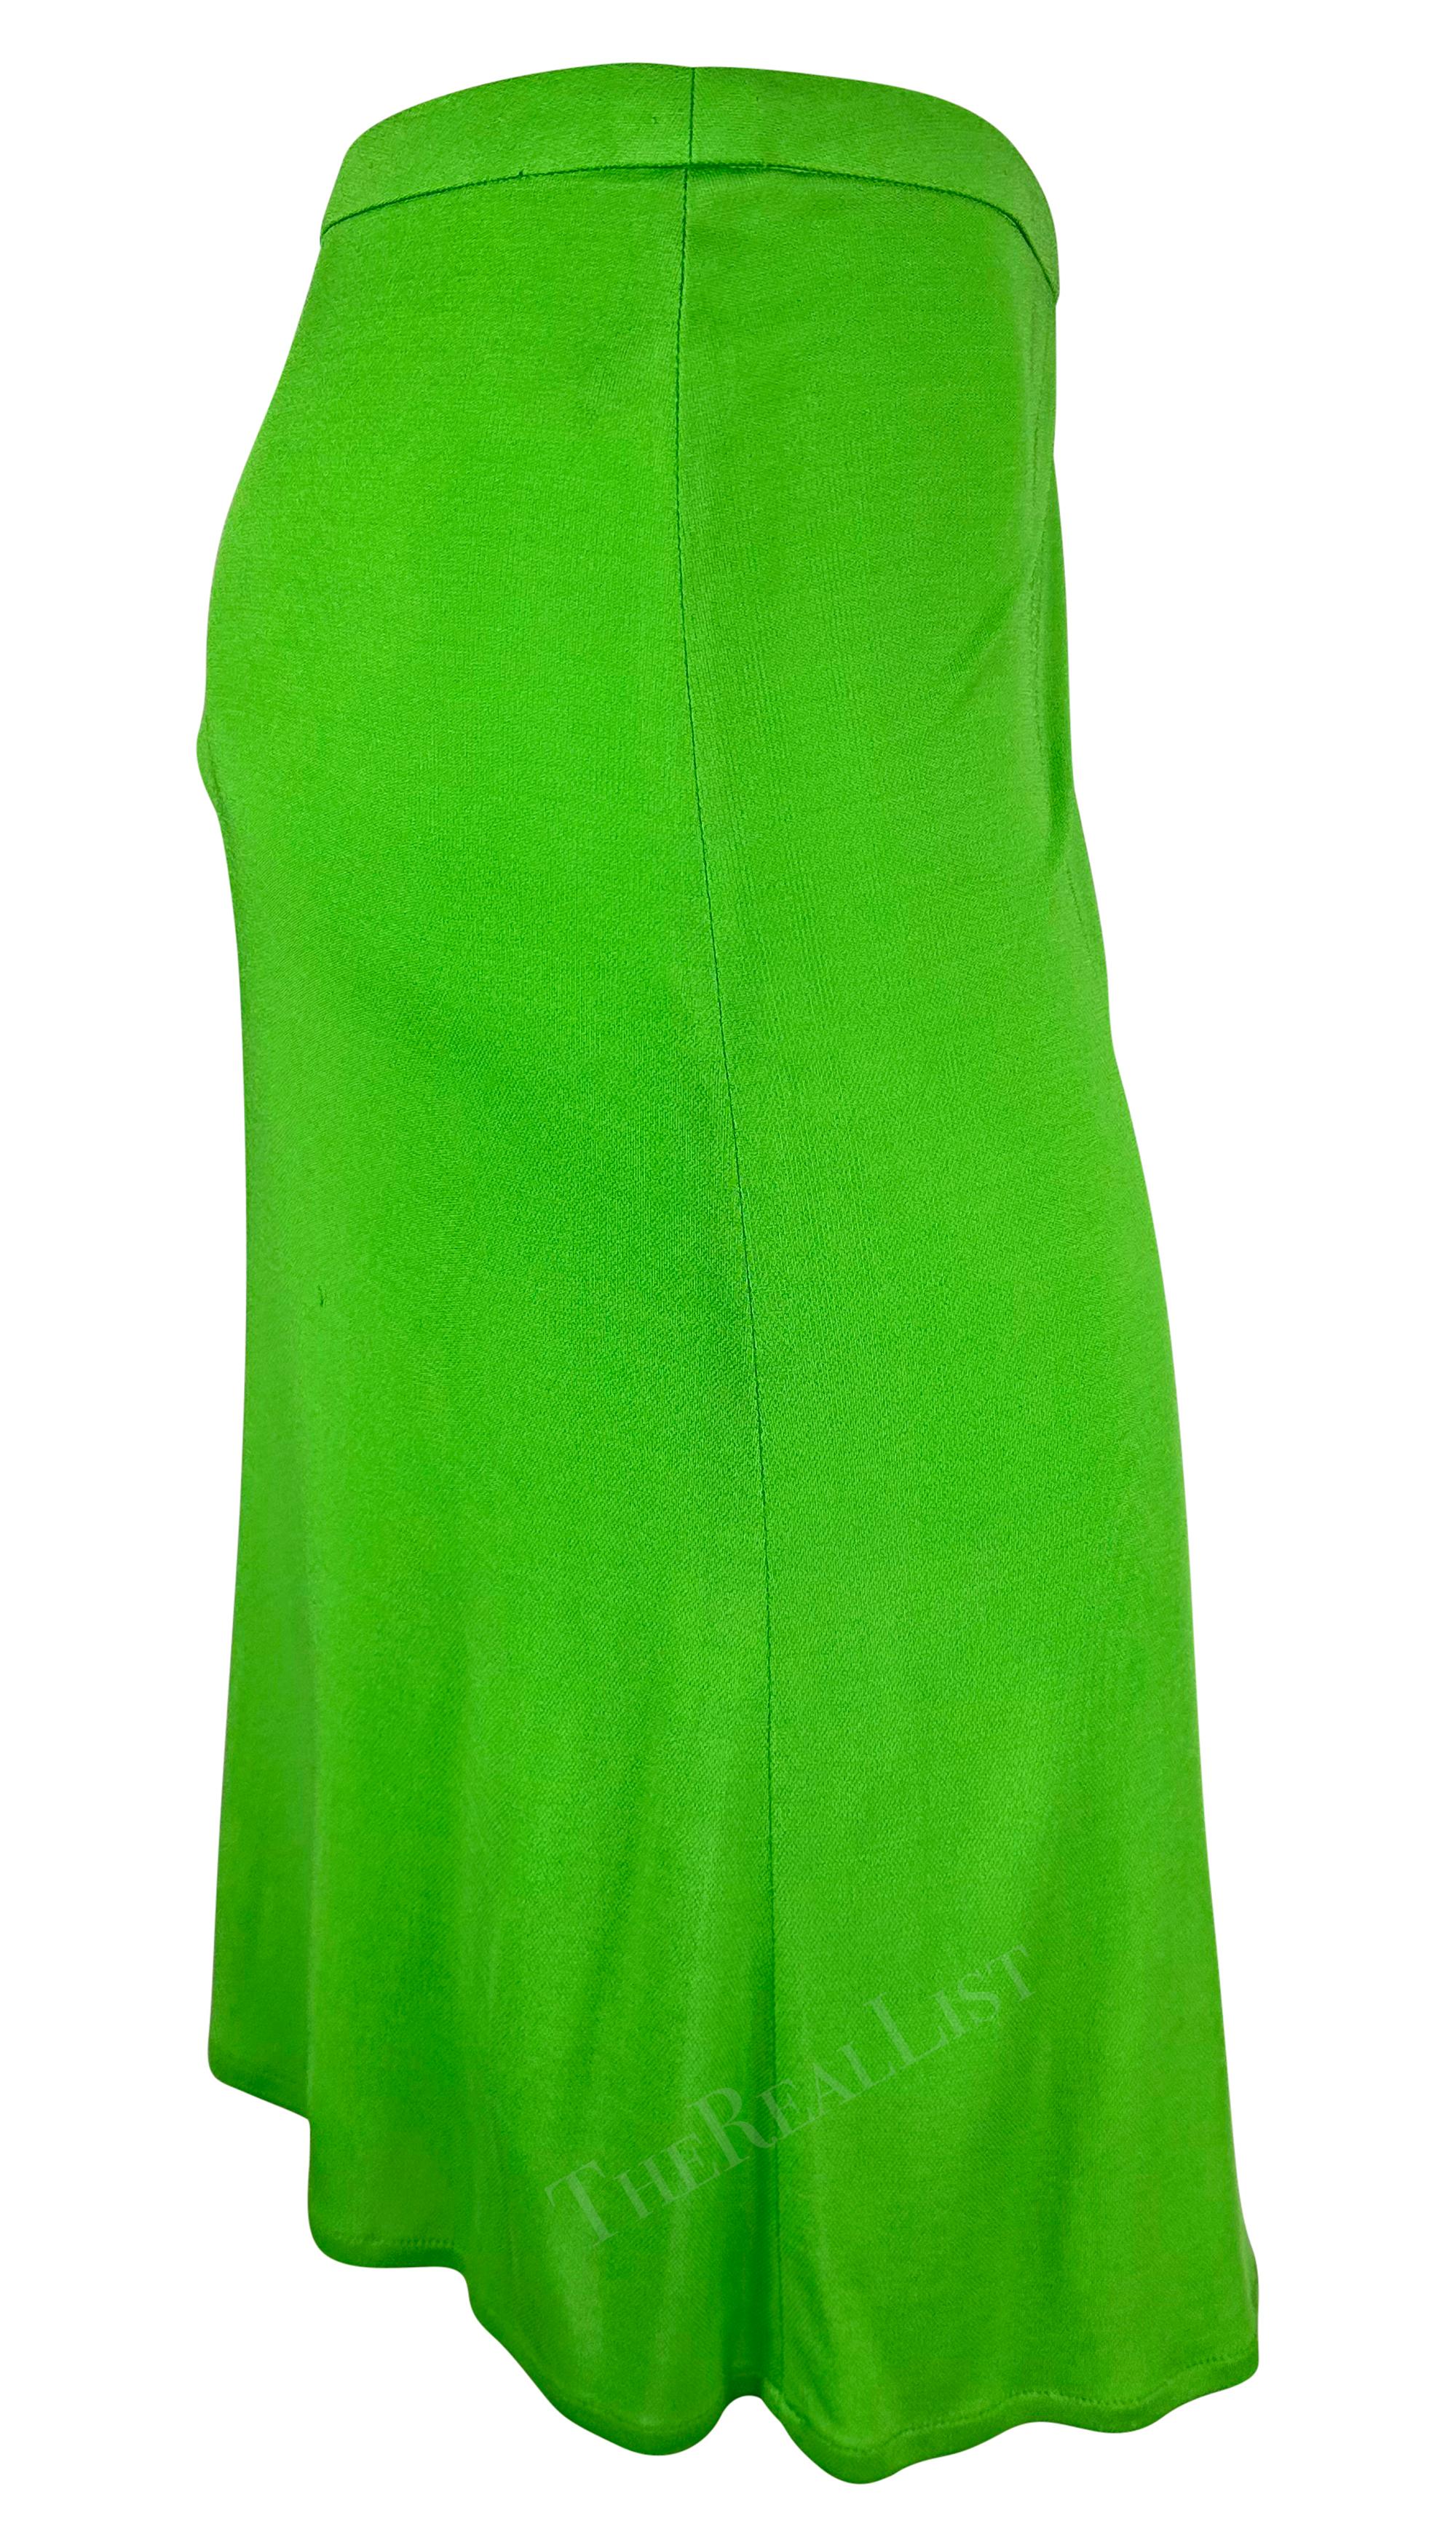 S/S 2000 Gianni Versace by Donatella Bright Green Viscose Slit Skirt For Sale 1